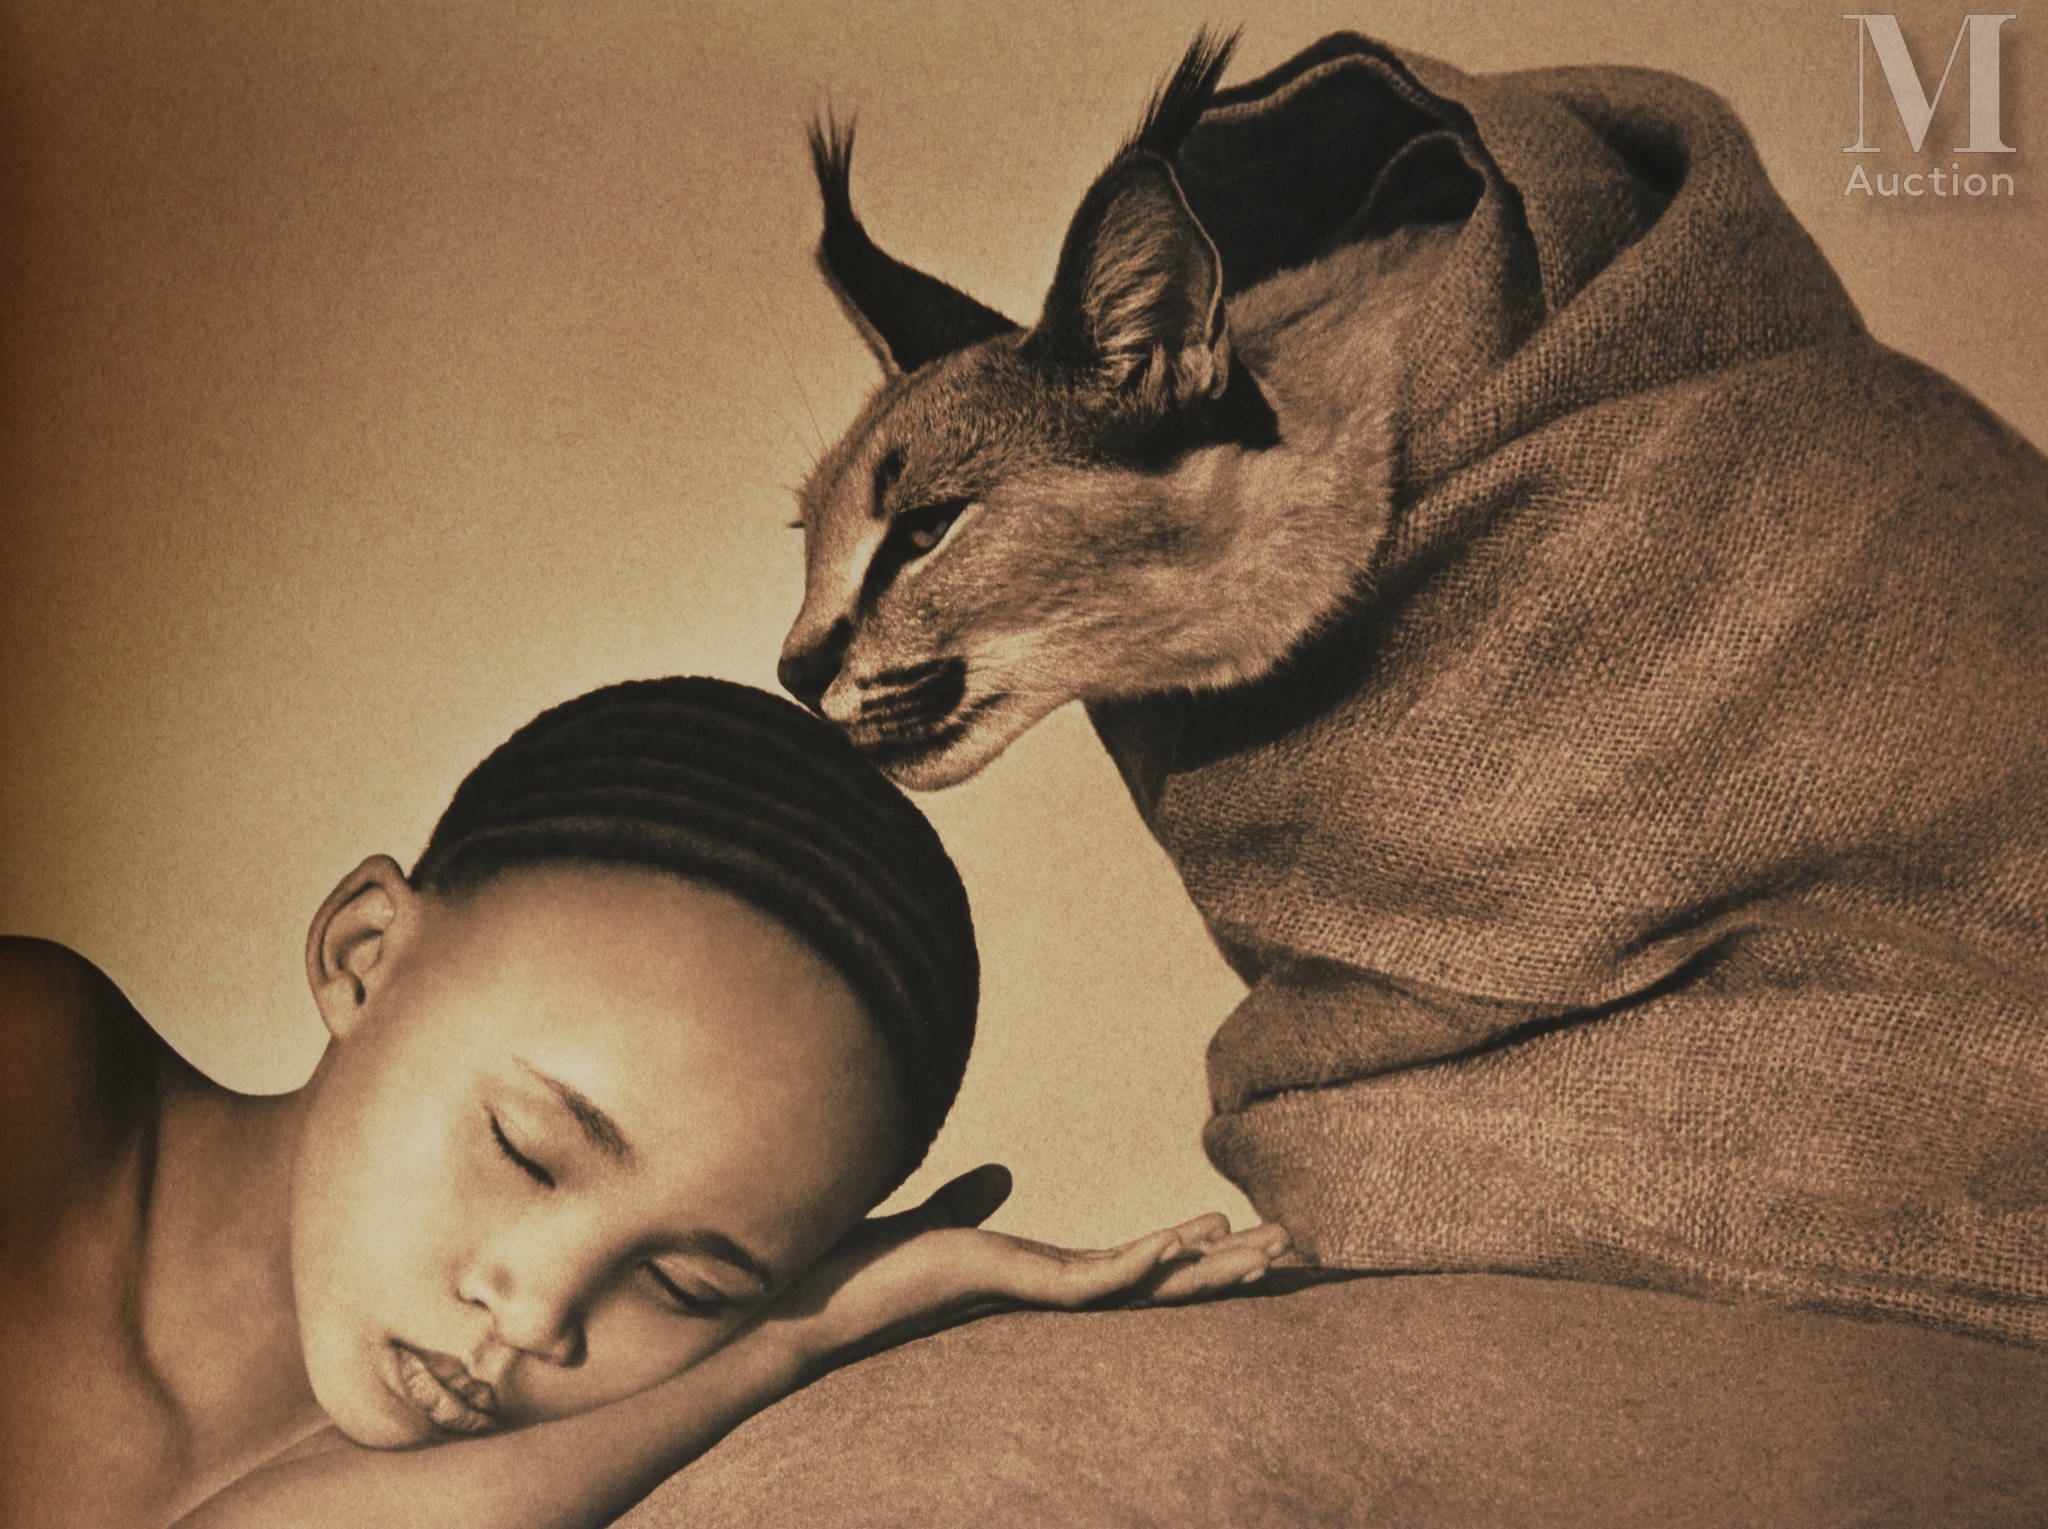 Artwork by Gregory Colbert, Ashes and Snow